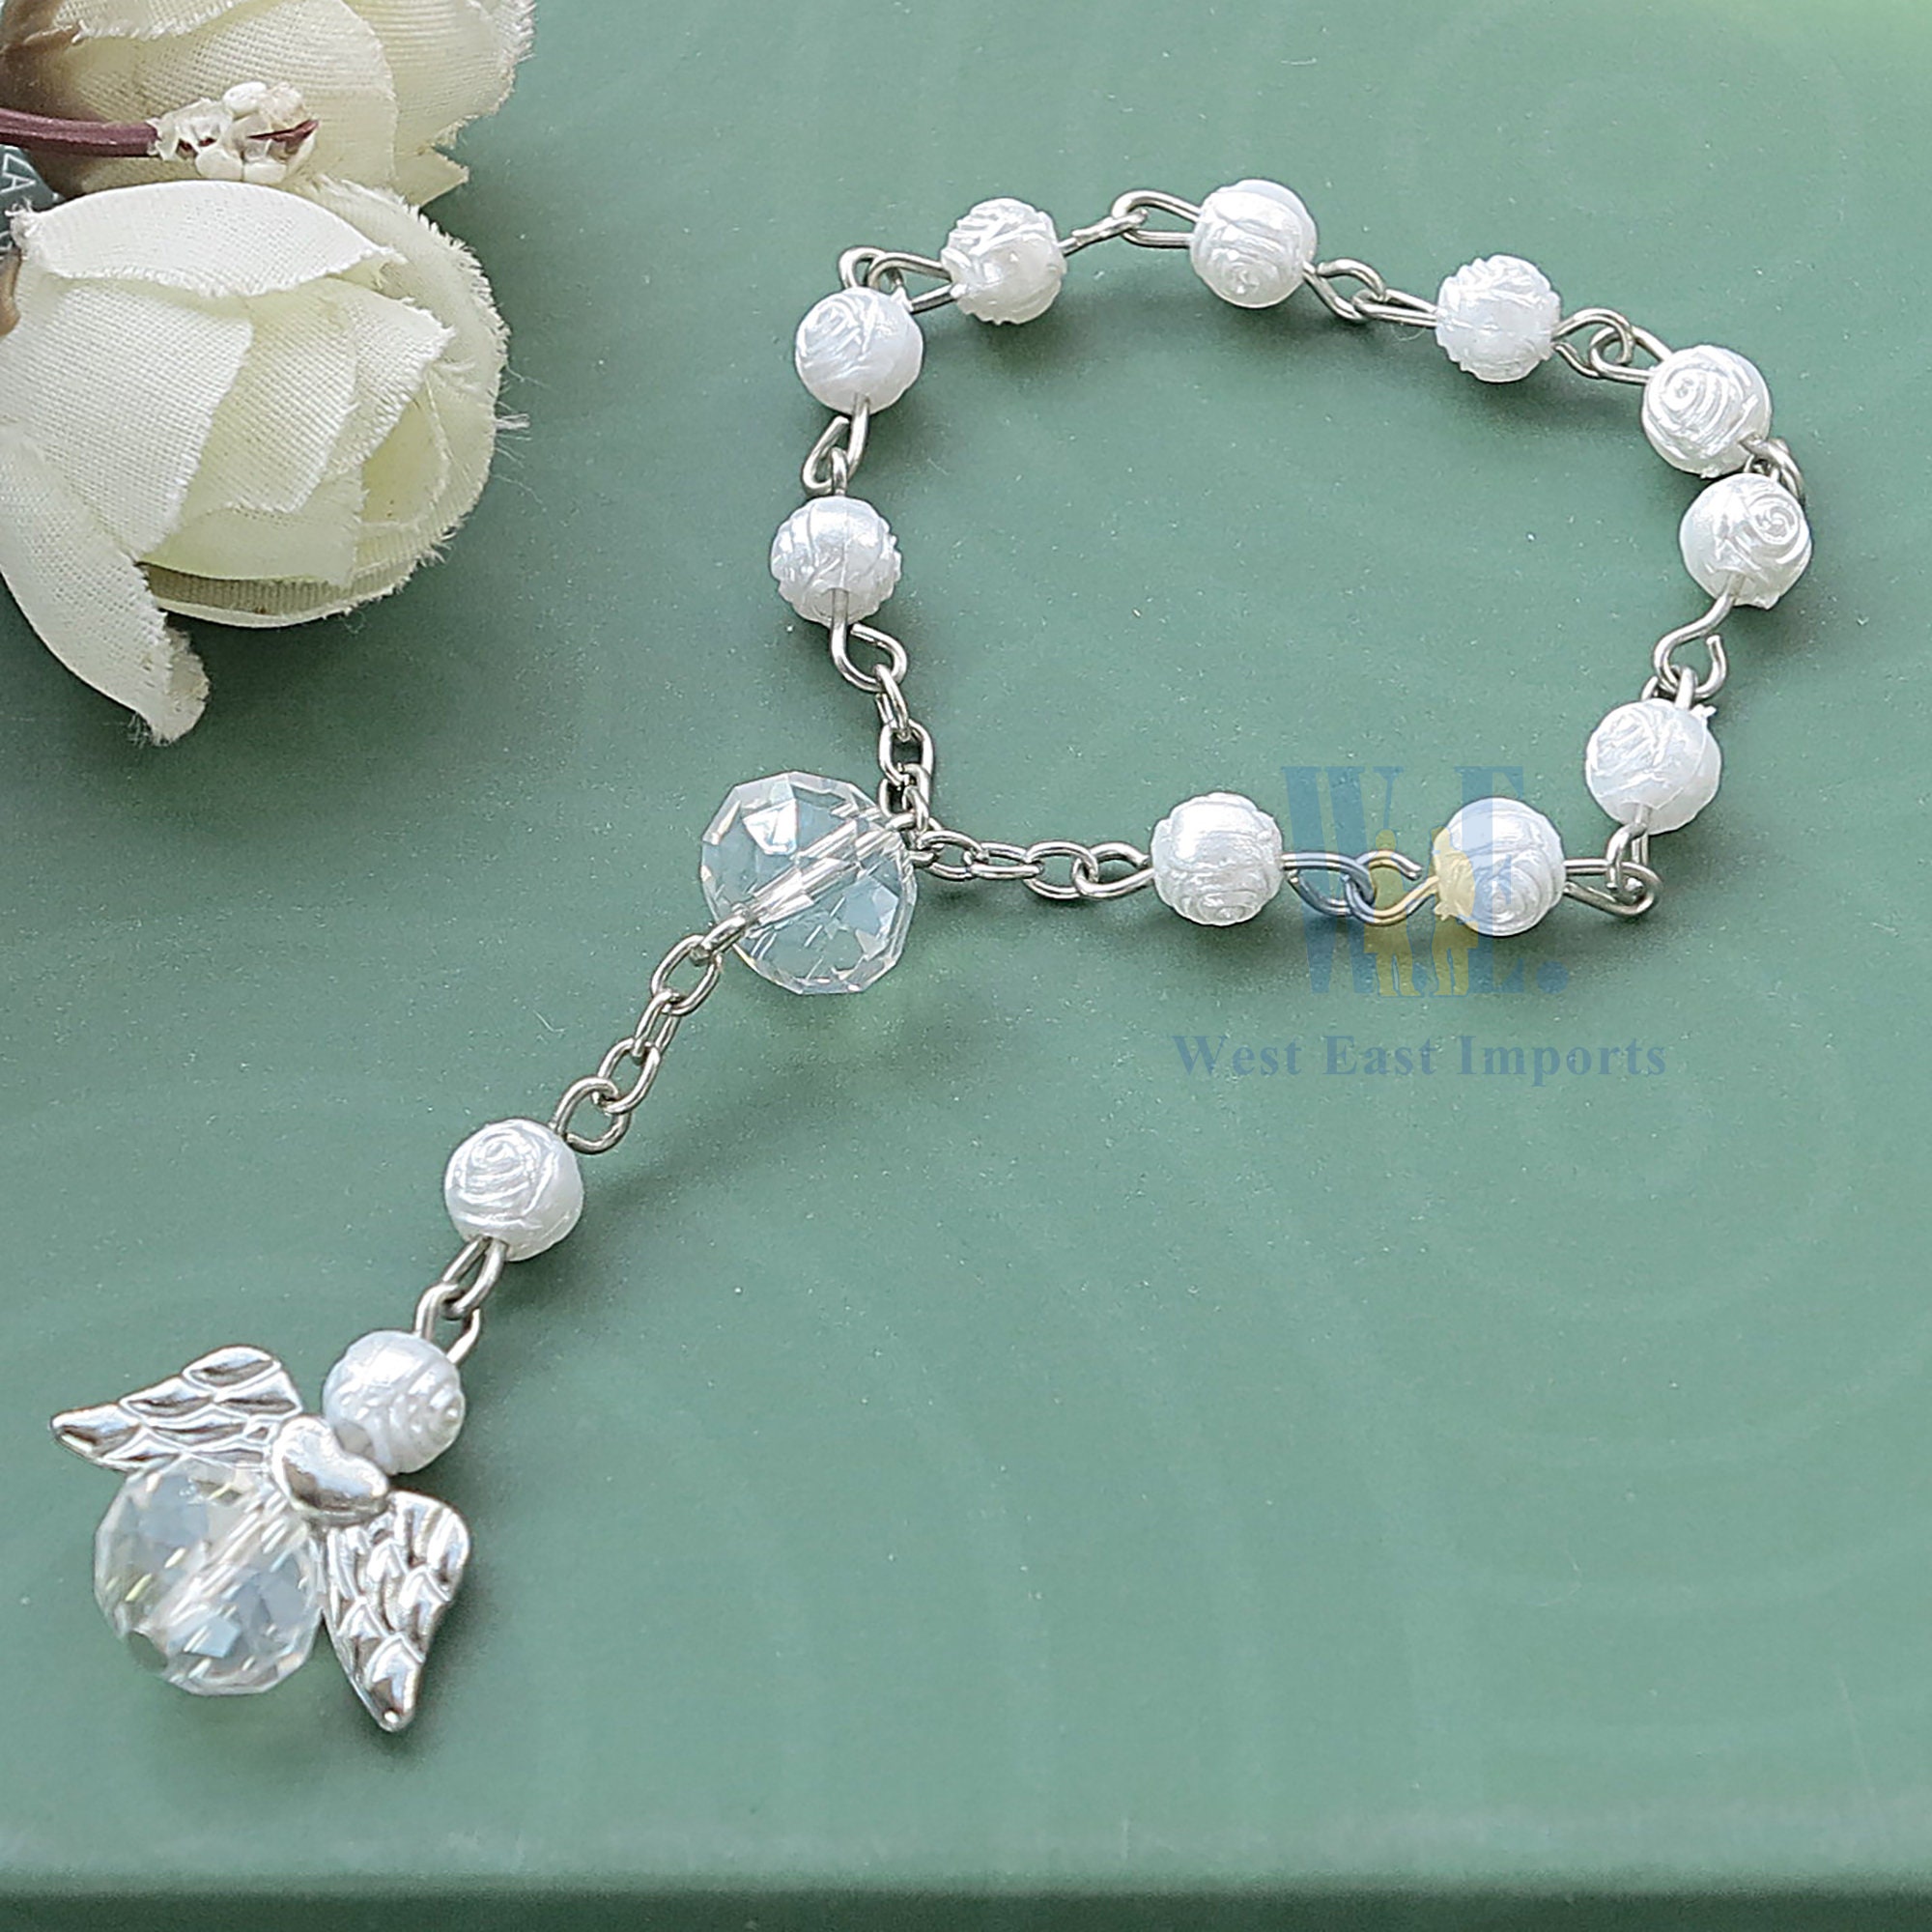 24 Pcs Blue Mini Rosary baptism Favors with Angels for Boy